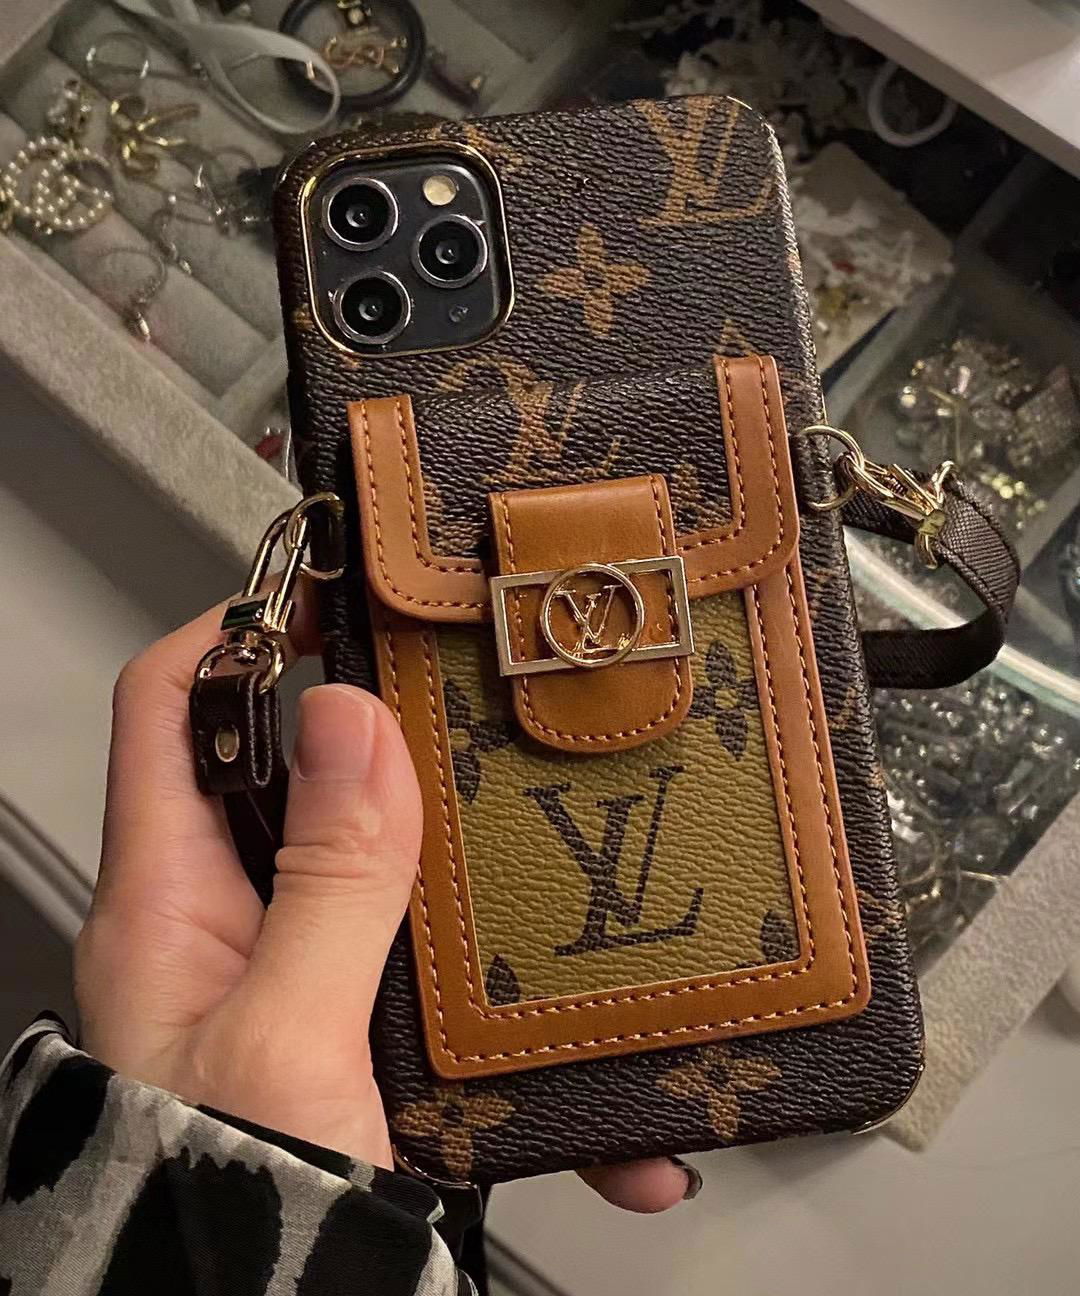 L Brand Leather case with bag belt for iphone 12 pro max 11 pro max xs max 7 8 4